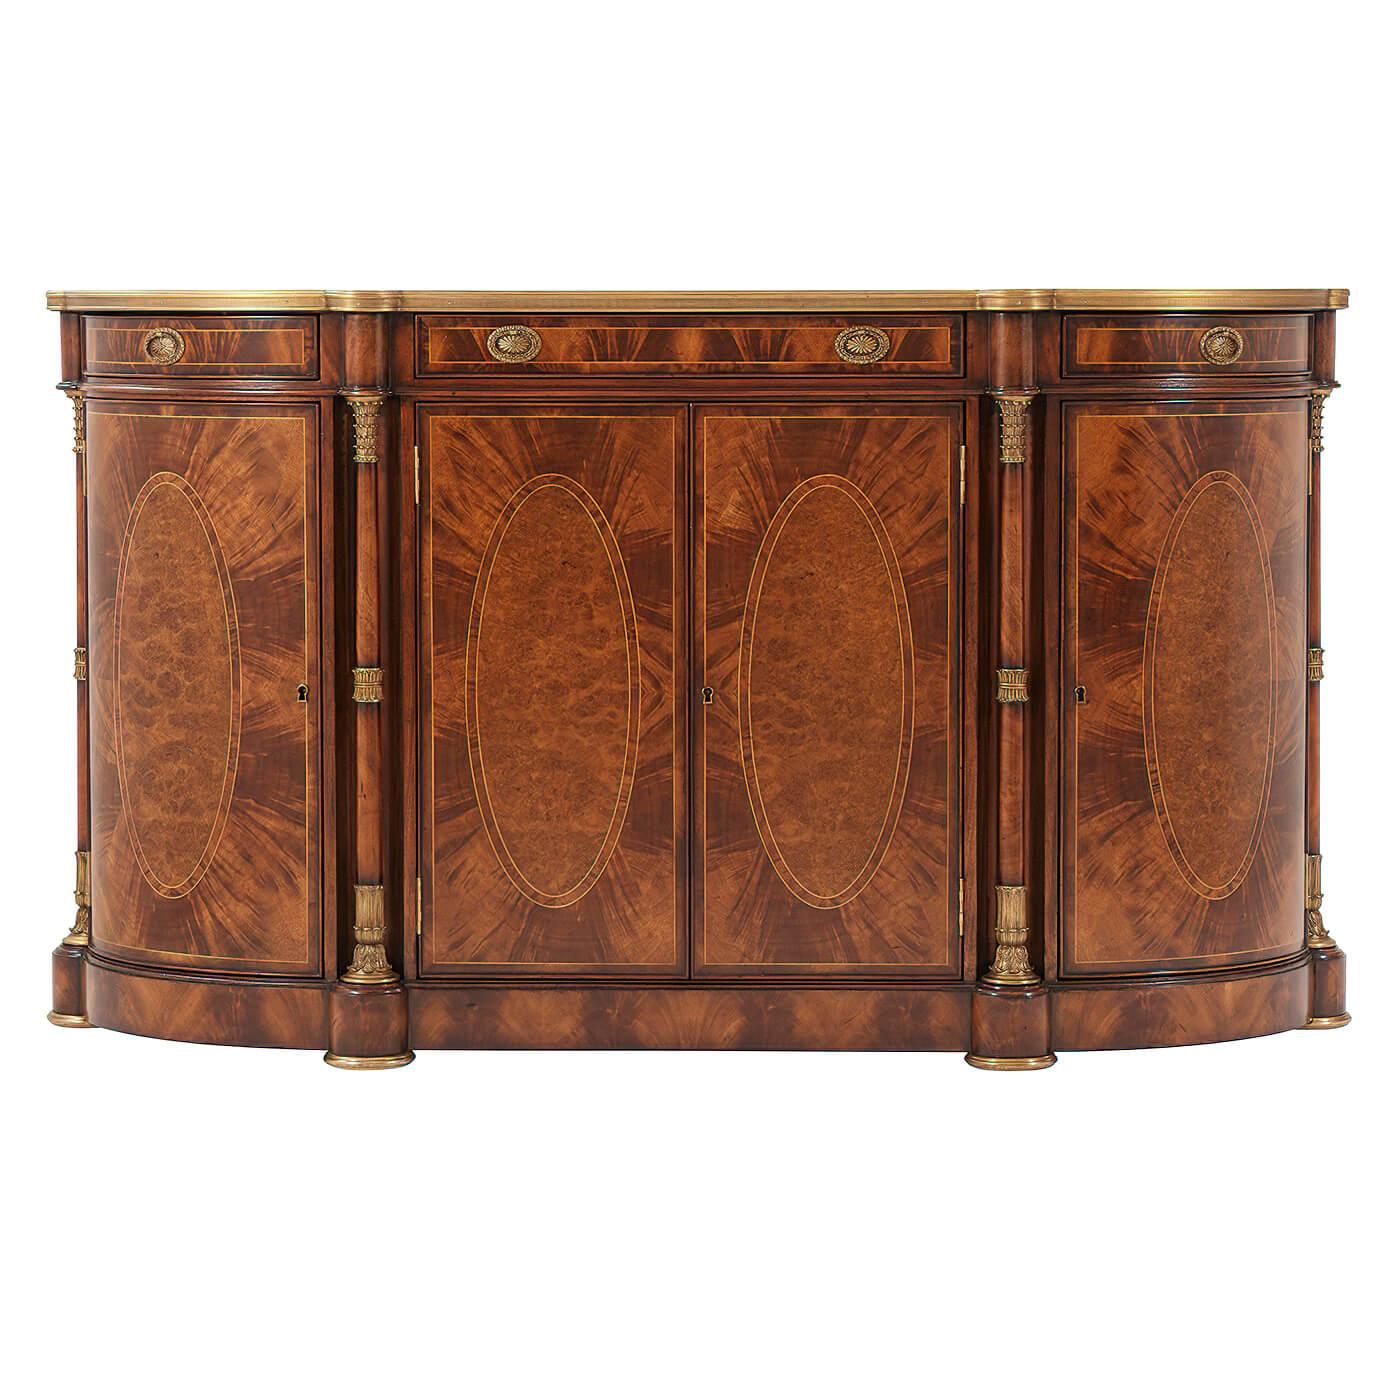 A French Empire style bowfront flame okum veneered and oval pollard oak burl panel inlaid side cabinet or buffet, the brass bound top above three frieze drawers above four cabinet doors enclosing three adjustable shelves, flanked by brass mounted